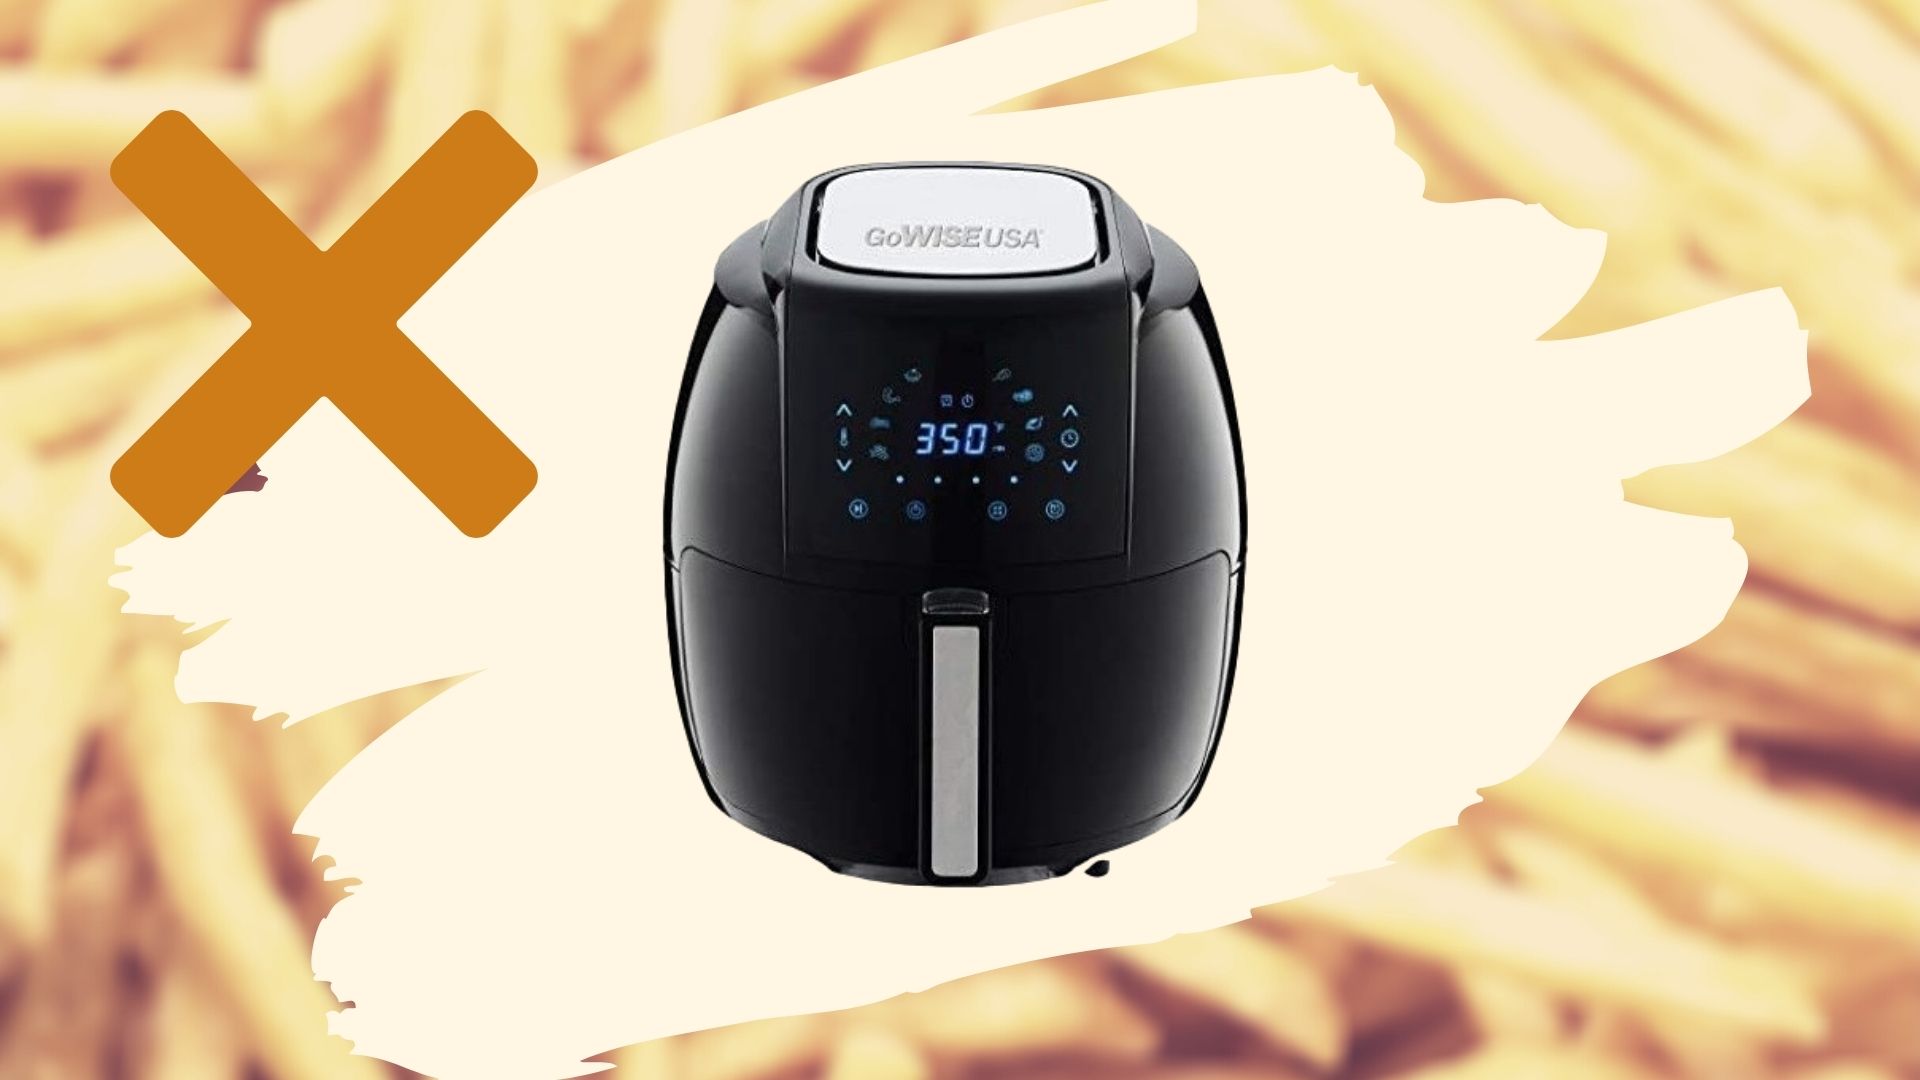 GoWISE Air Fryer Review